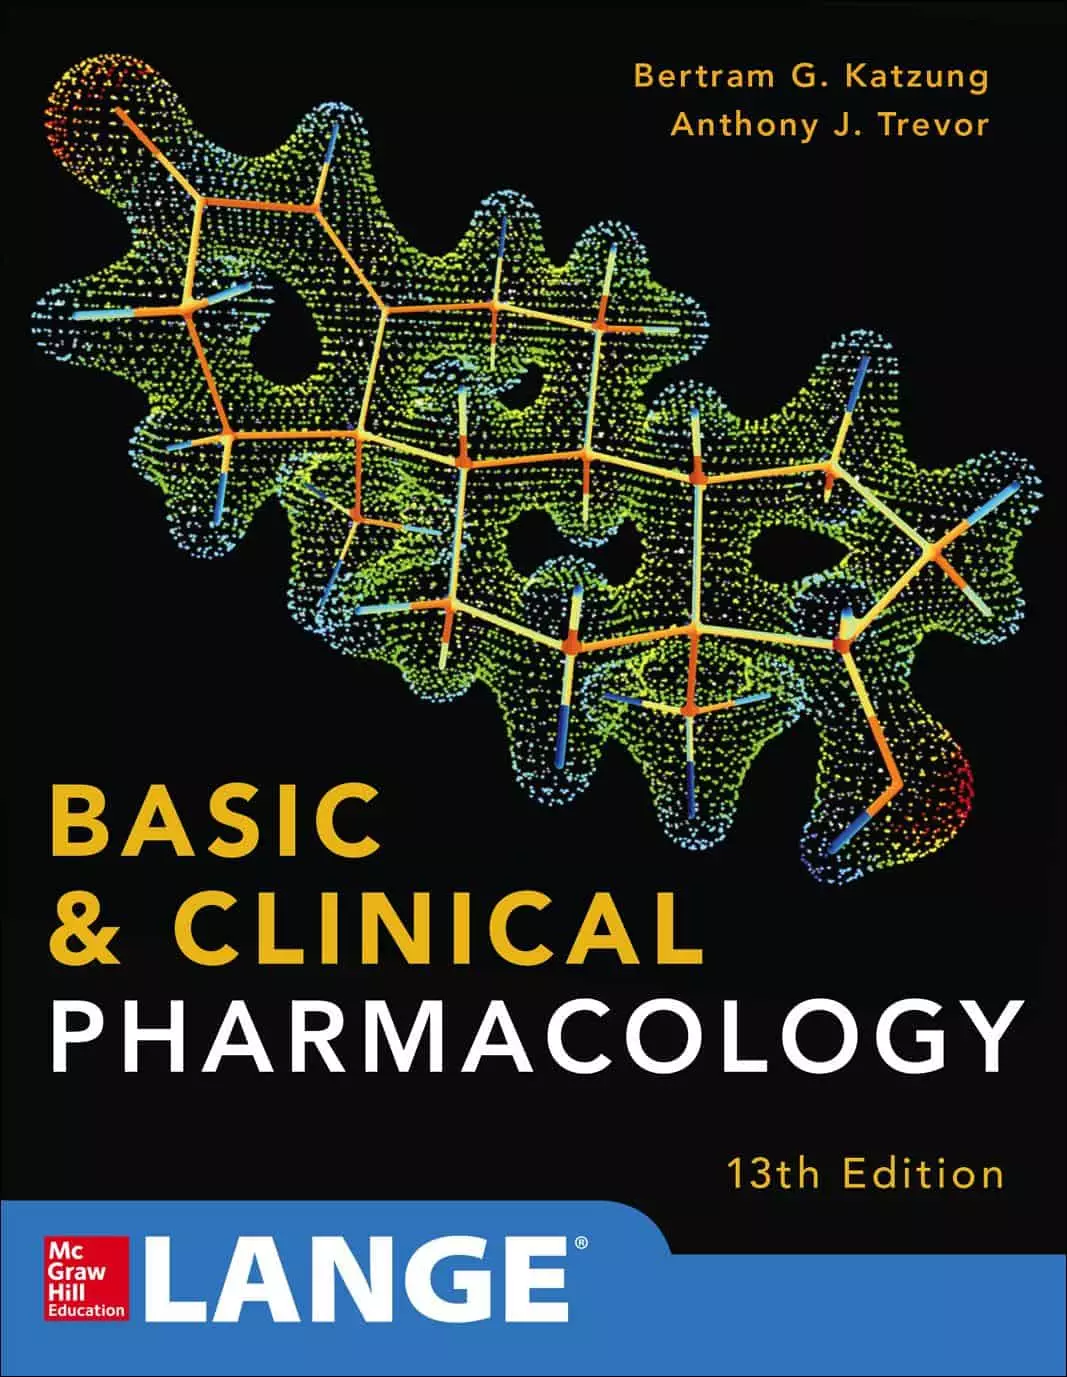 Basic and Clinical Pharmacology (13th Edition) - eBook